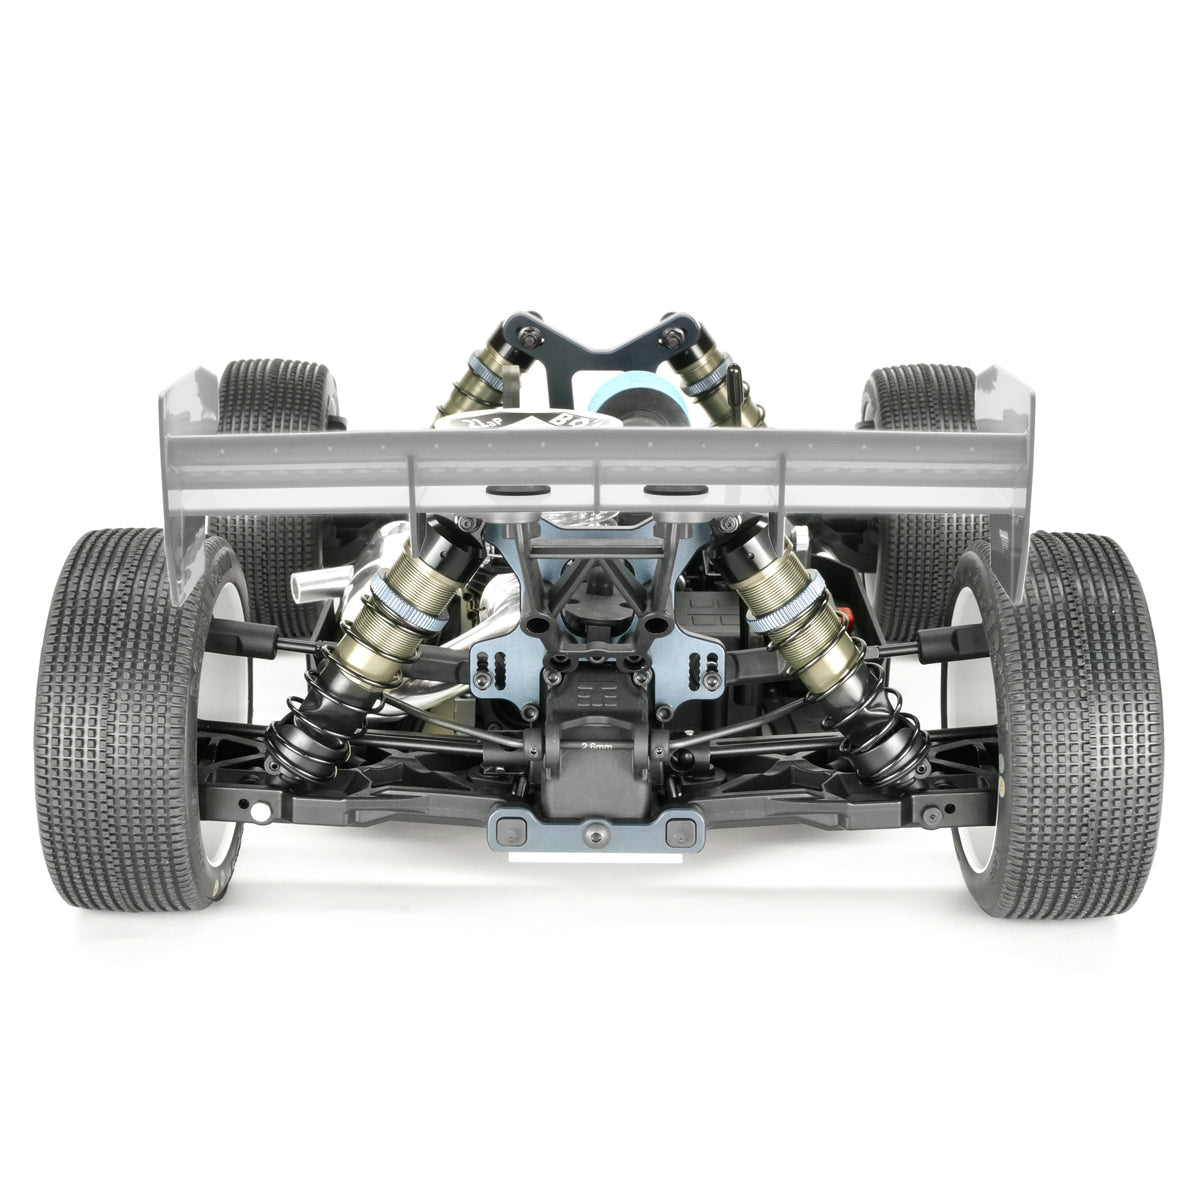 TKR9300 – NB48 2.0 1/8th 4WD Competition Nitro Buggy Kit - RACERC